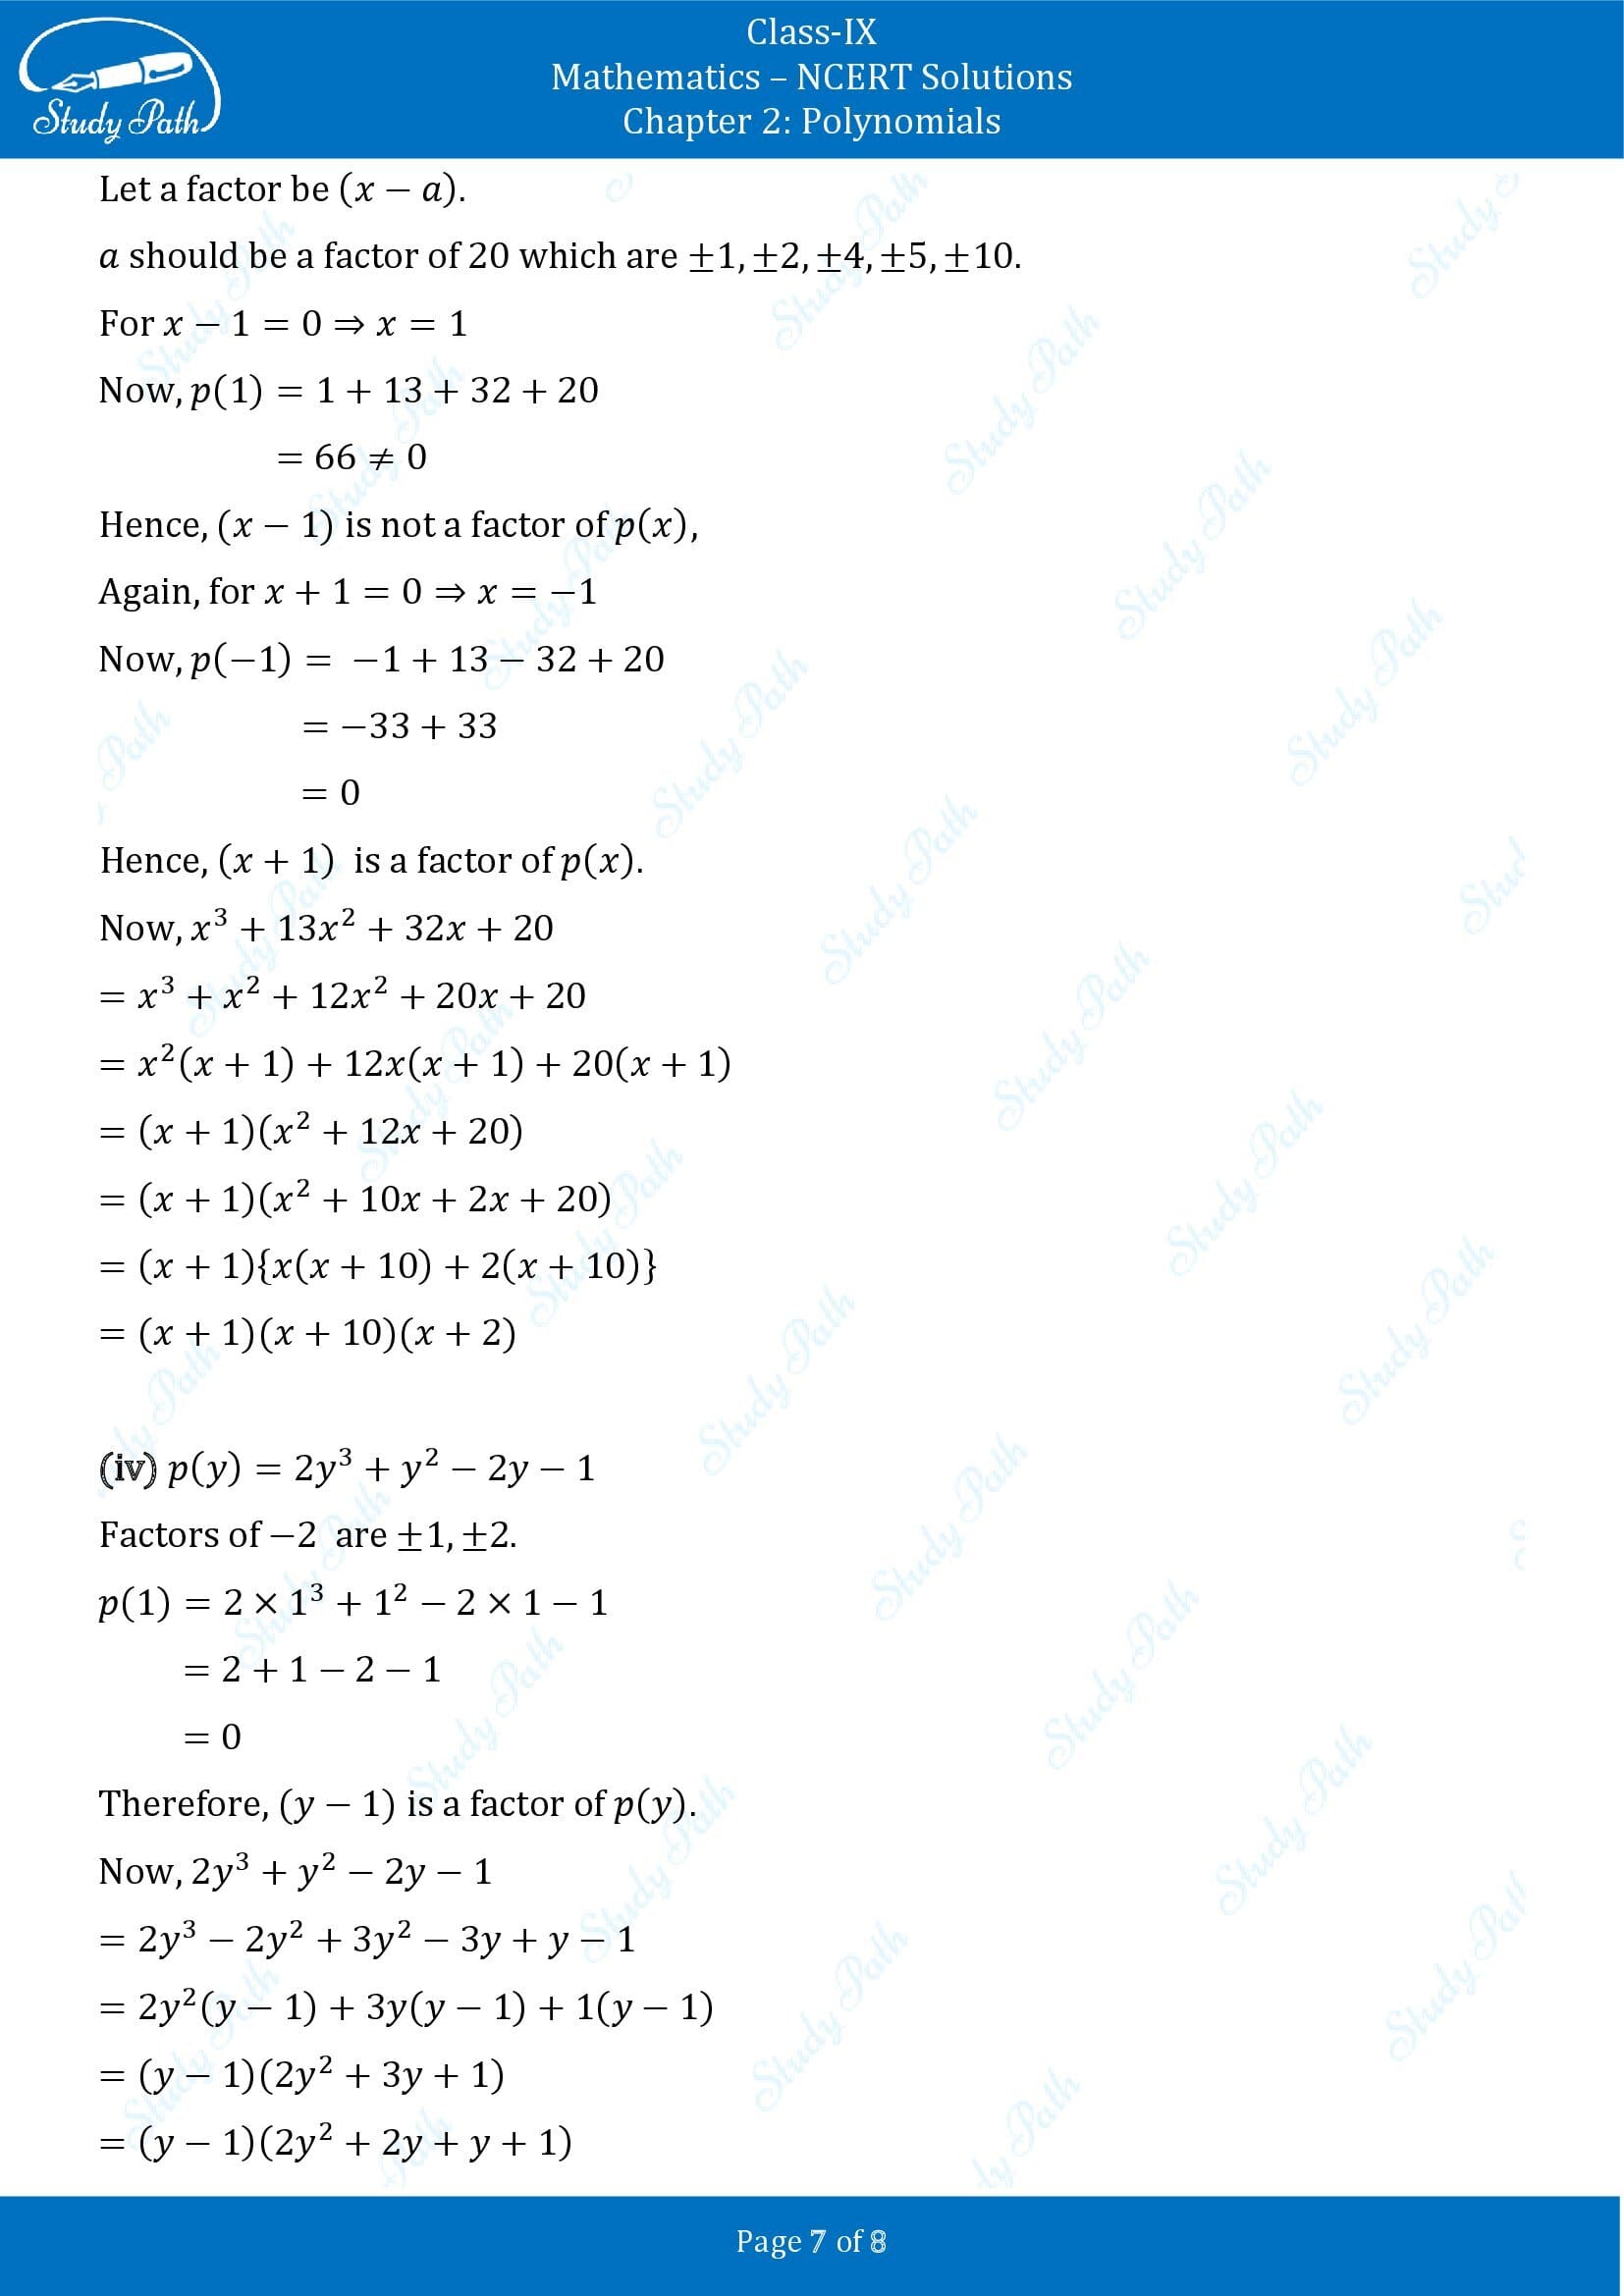 NCERT Solutions for Class 9 Maths Chapter 2 Polynomials Exercise 2.4 00007